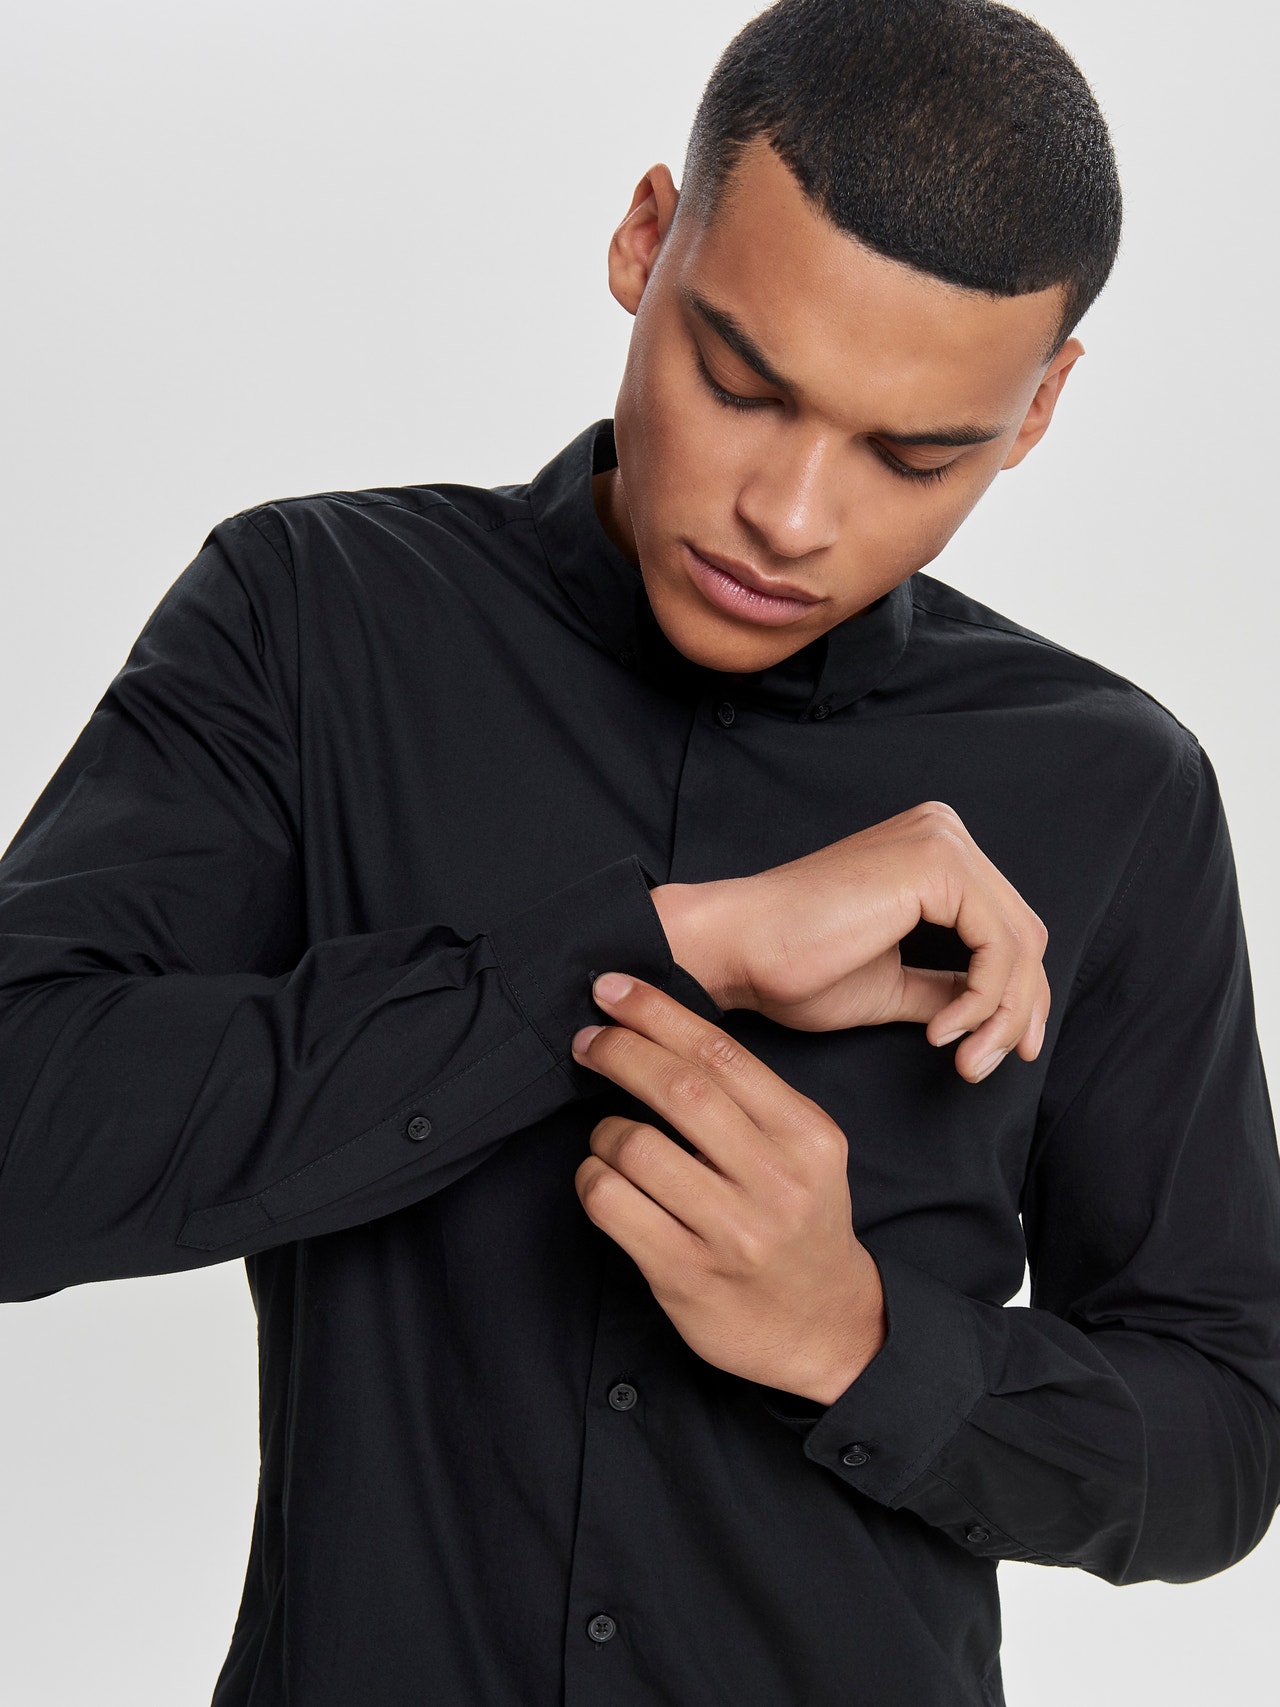 ONLY & SONS Classic shirt -Black - 22010862